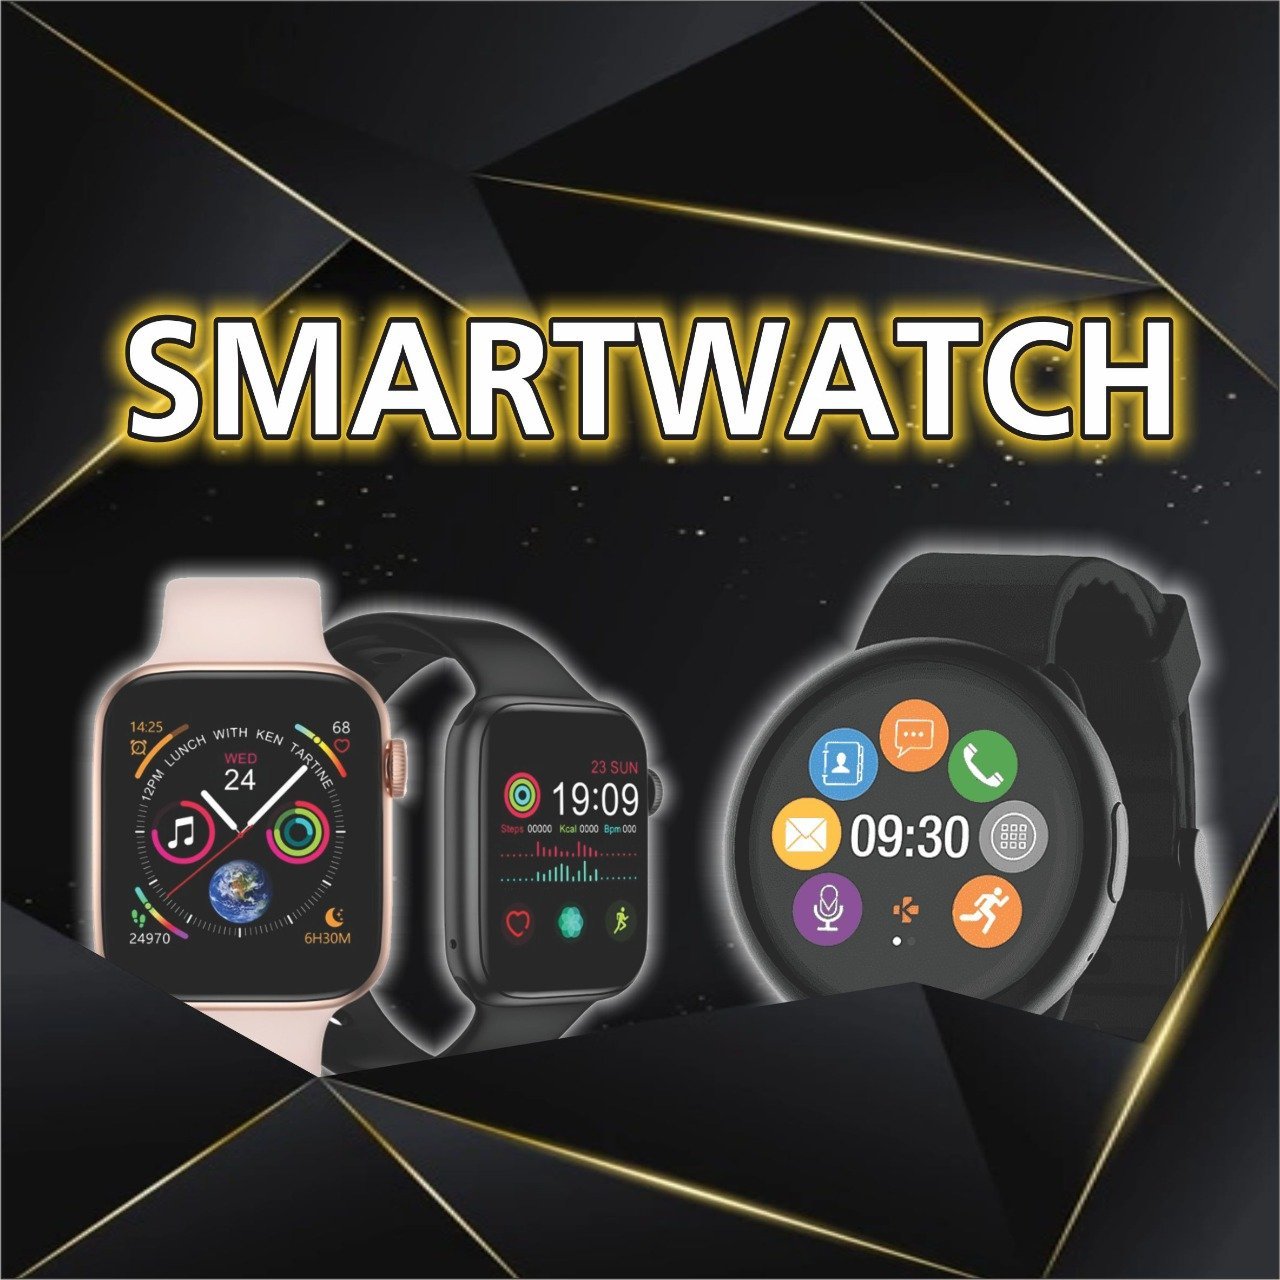 Smartwatch | colombiahit